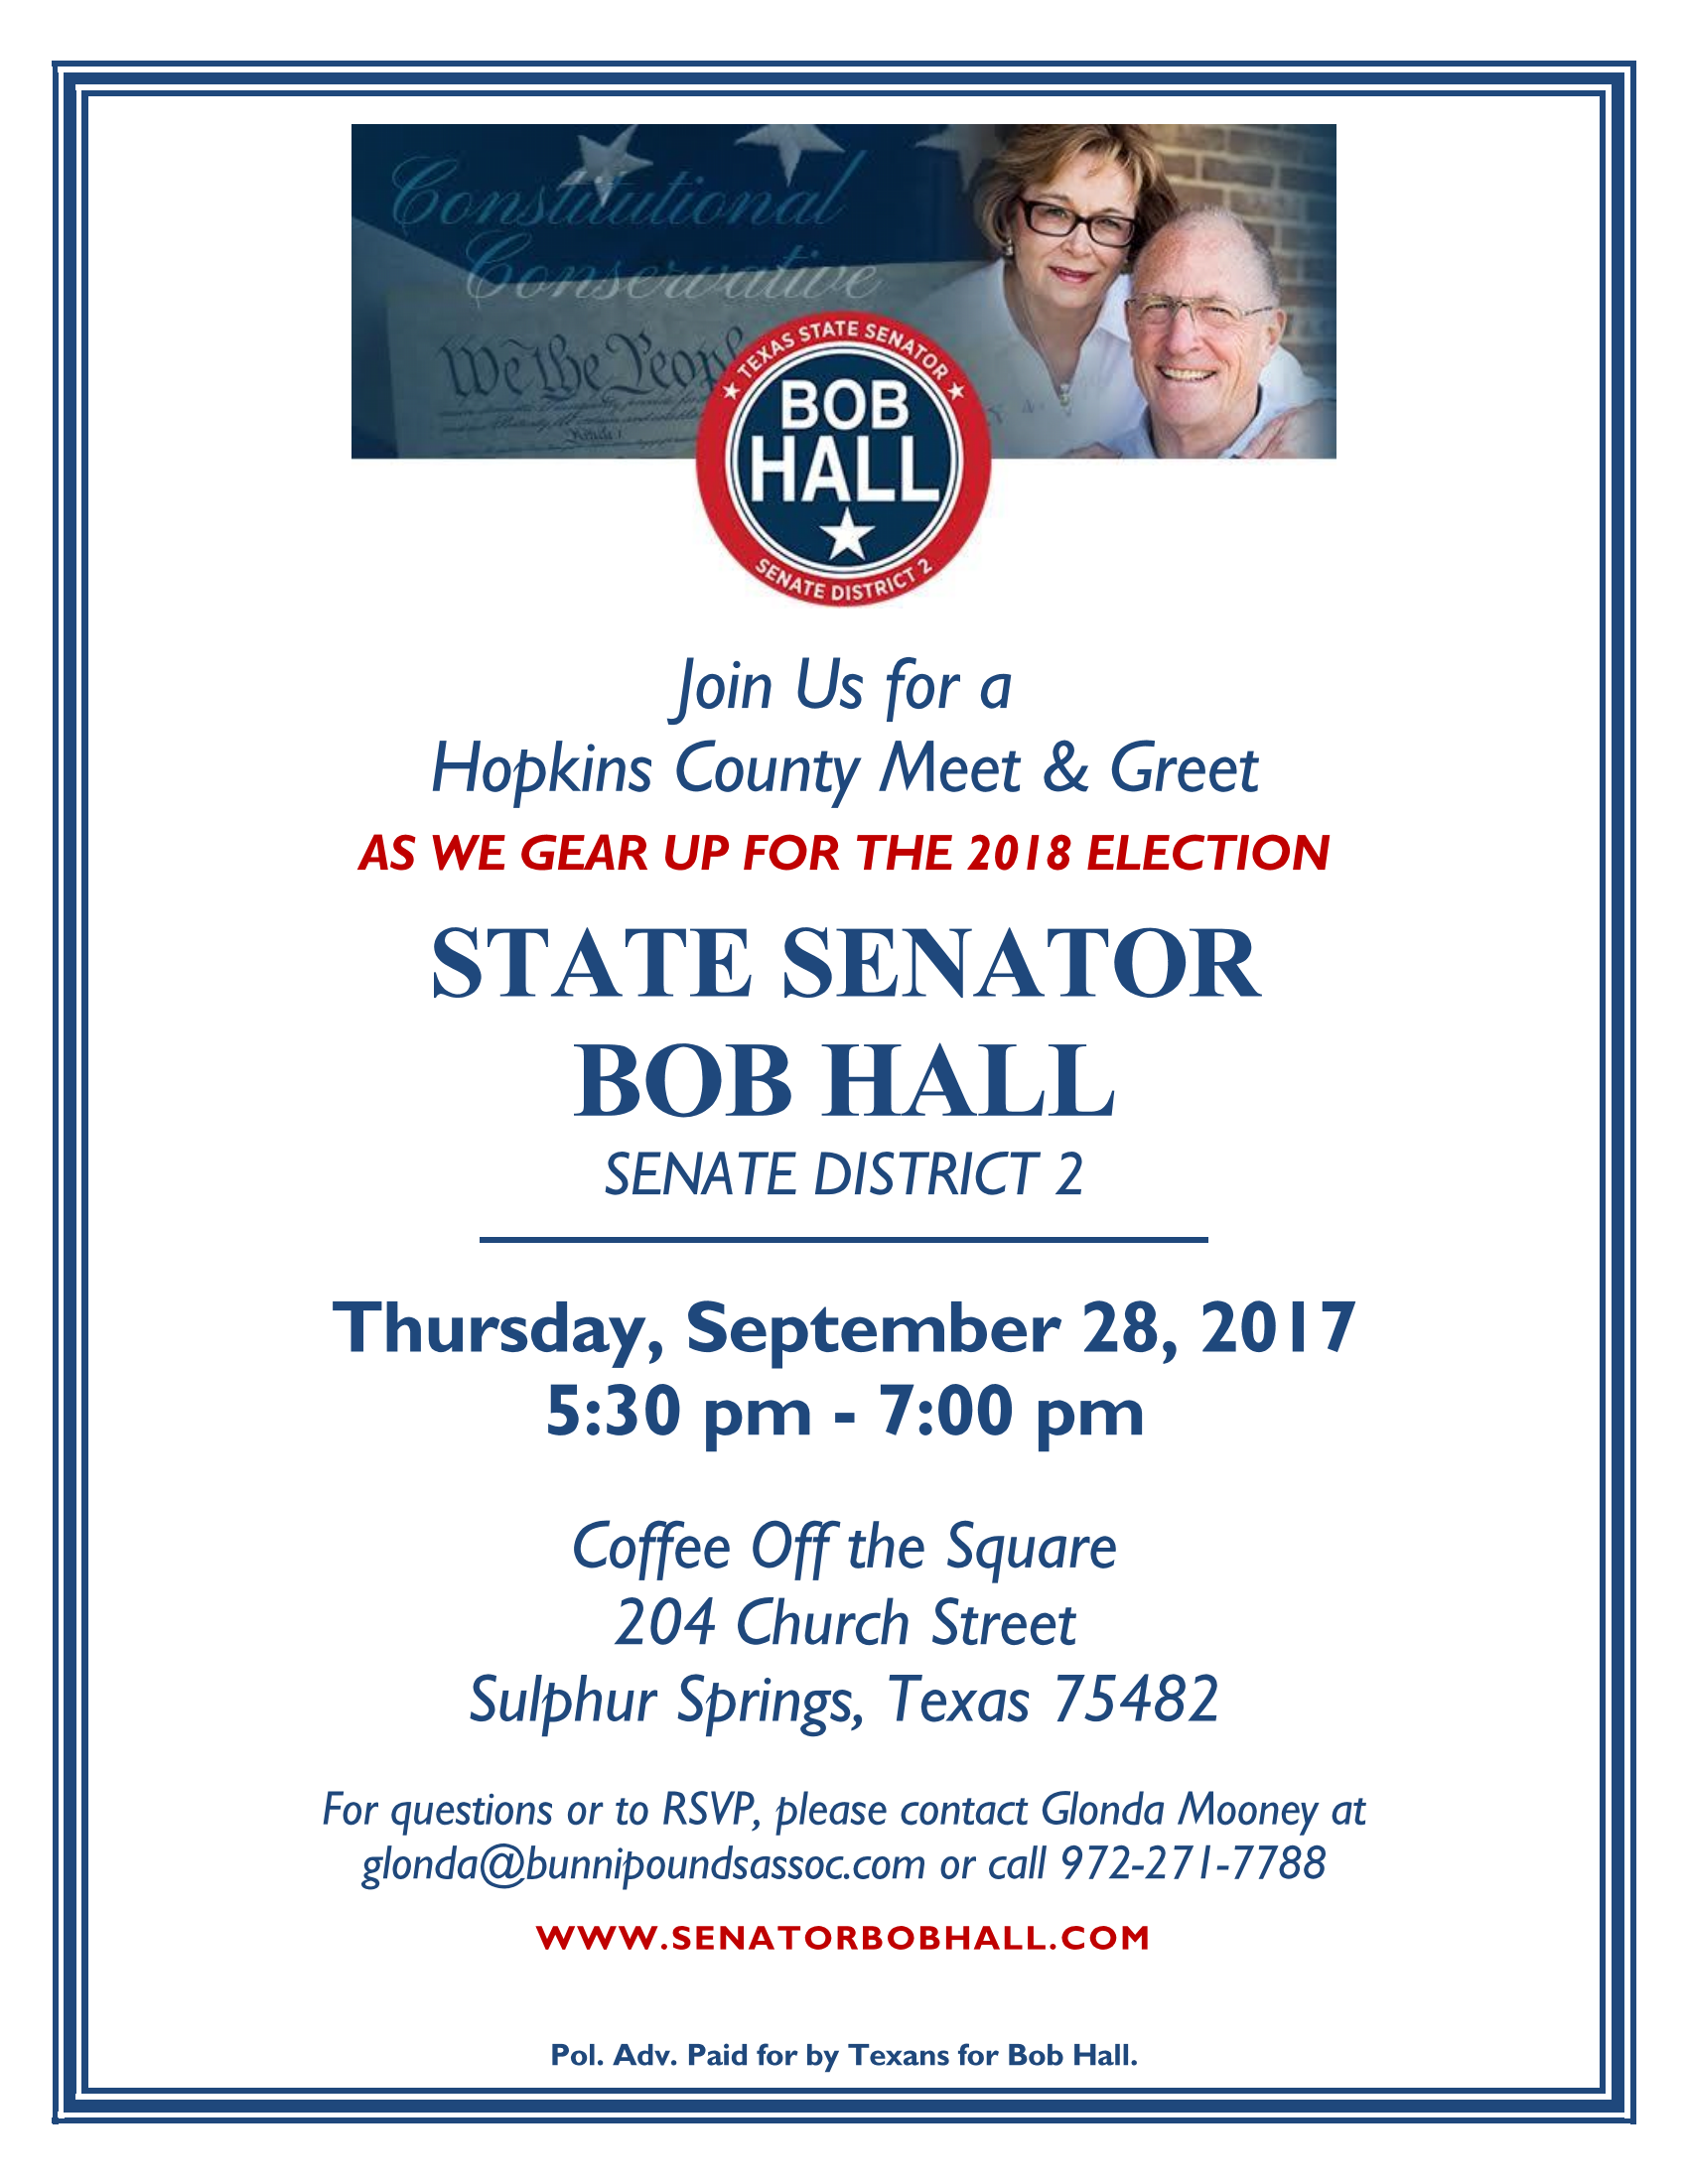 State Senator Bob Hall Hosting Meet and Greet at Coffee Off the Square on September 28th